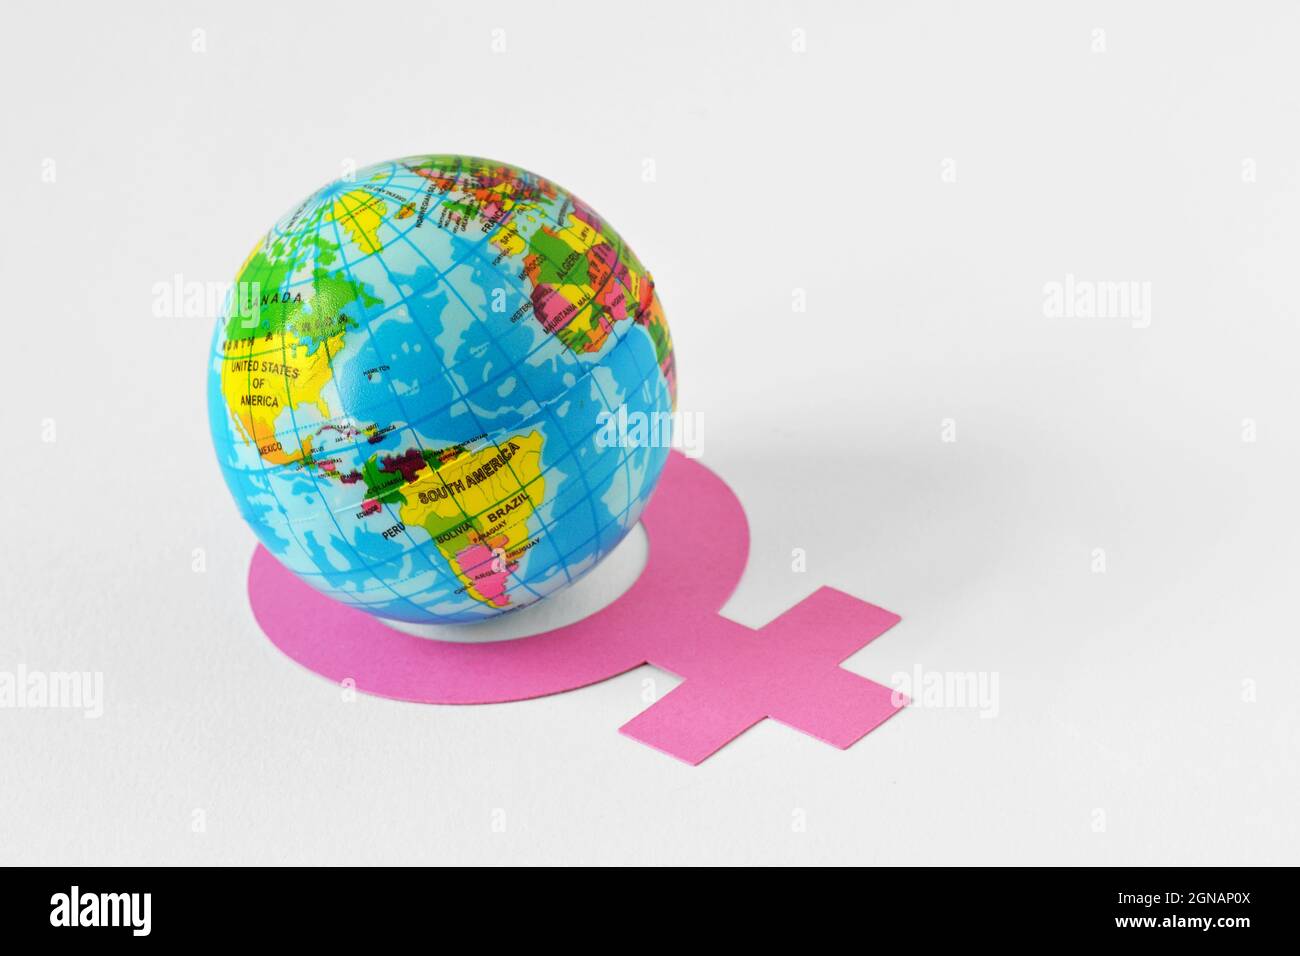 Earth globe inside the circle of female gender symbol - Concept of feminism and gender issues Stock Photo